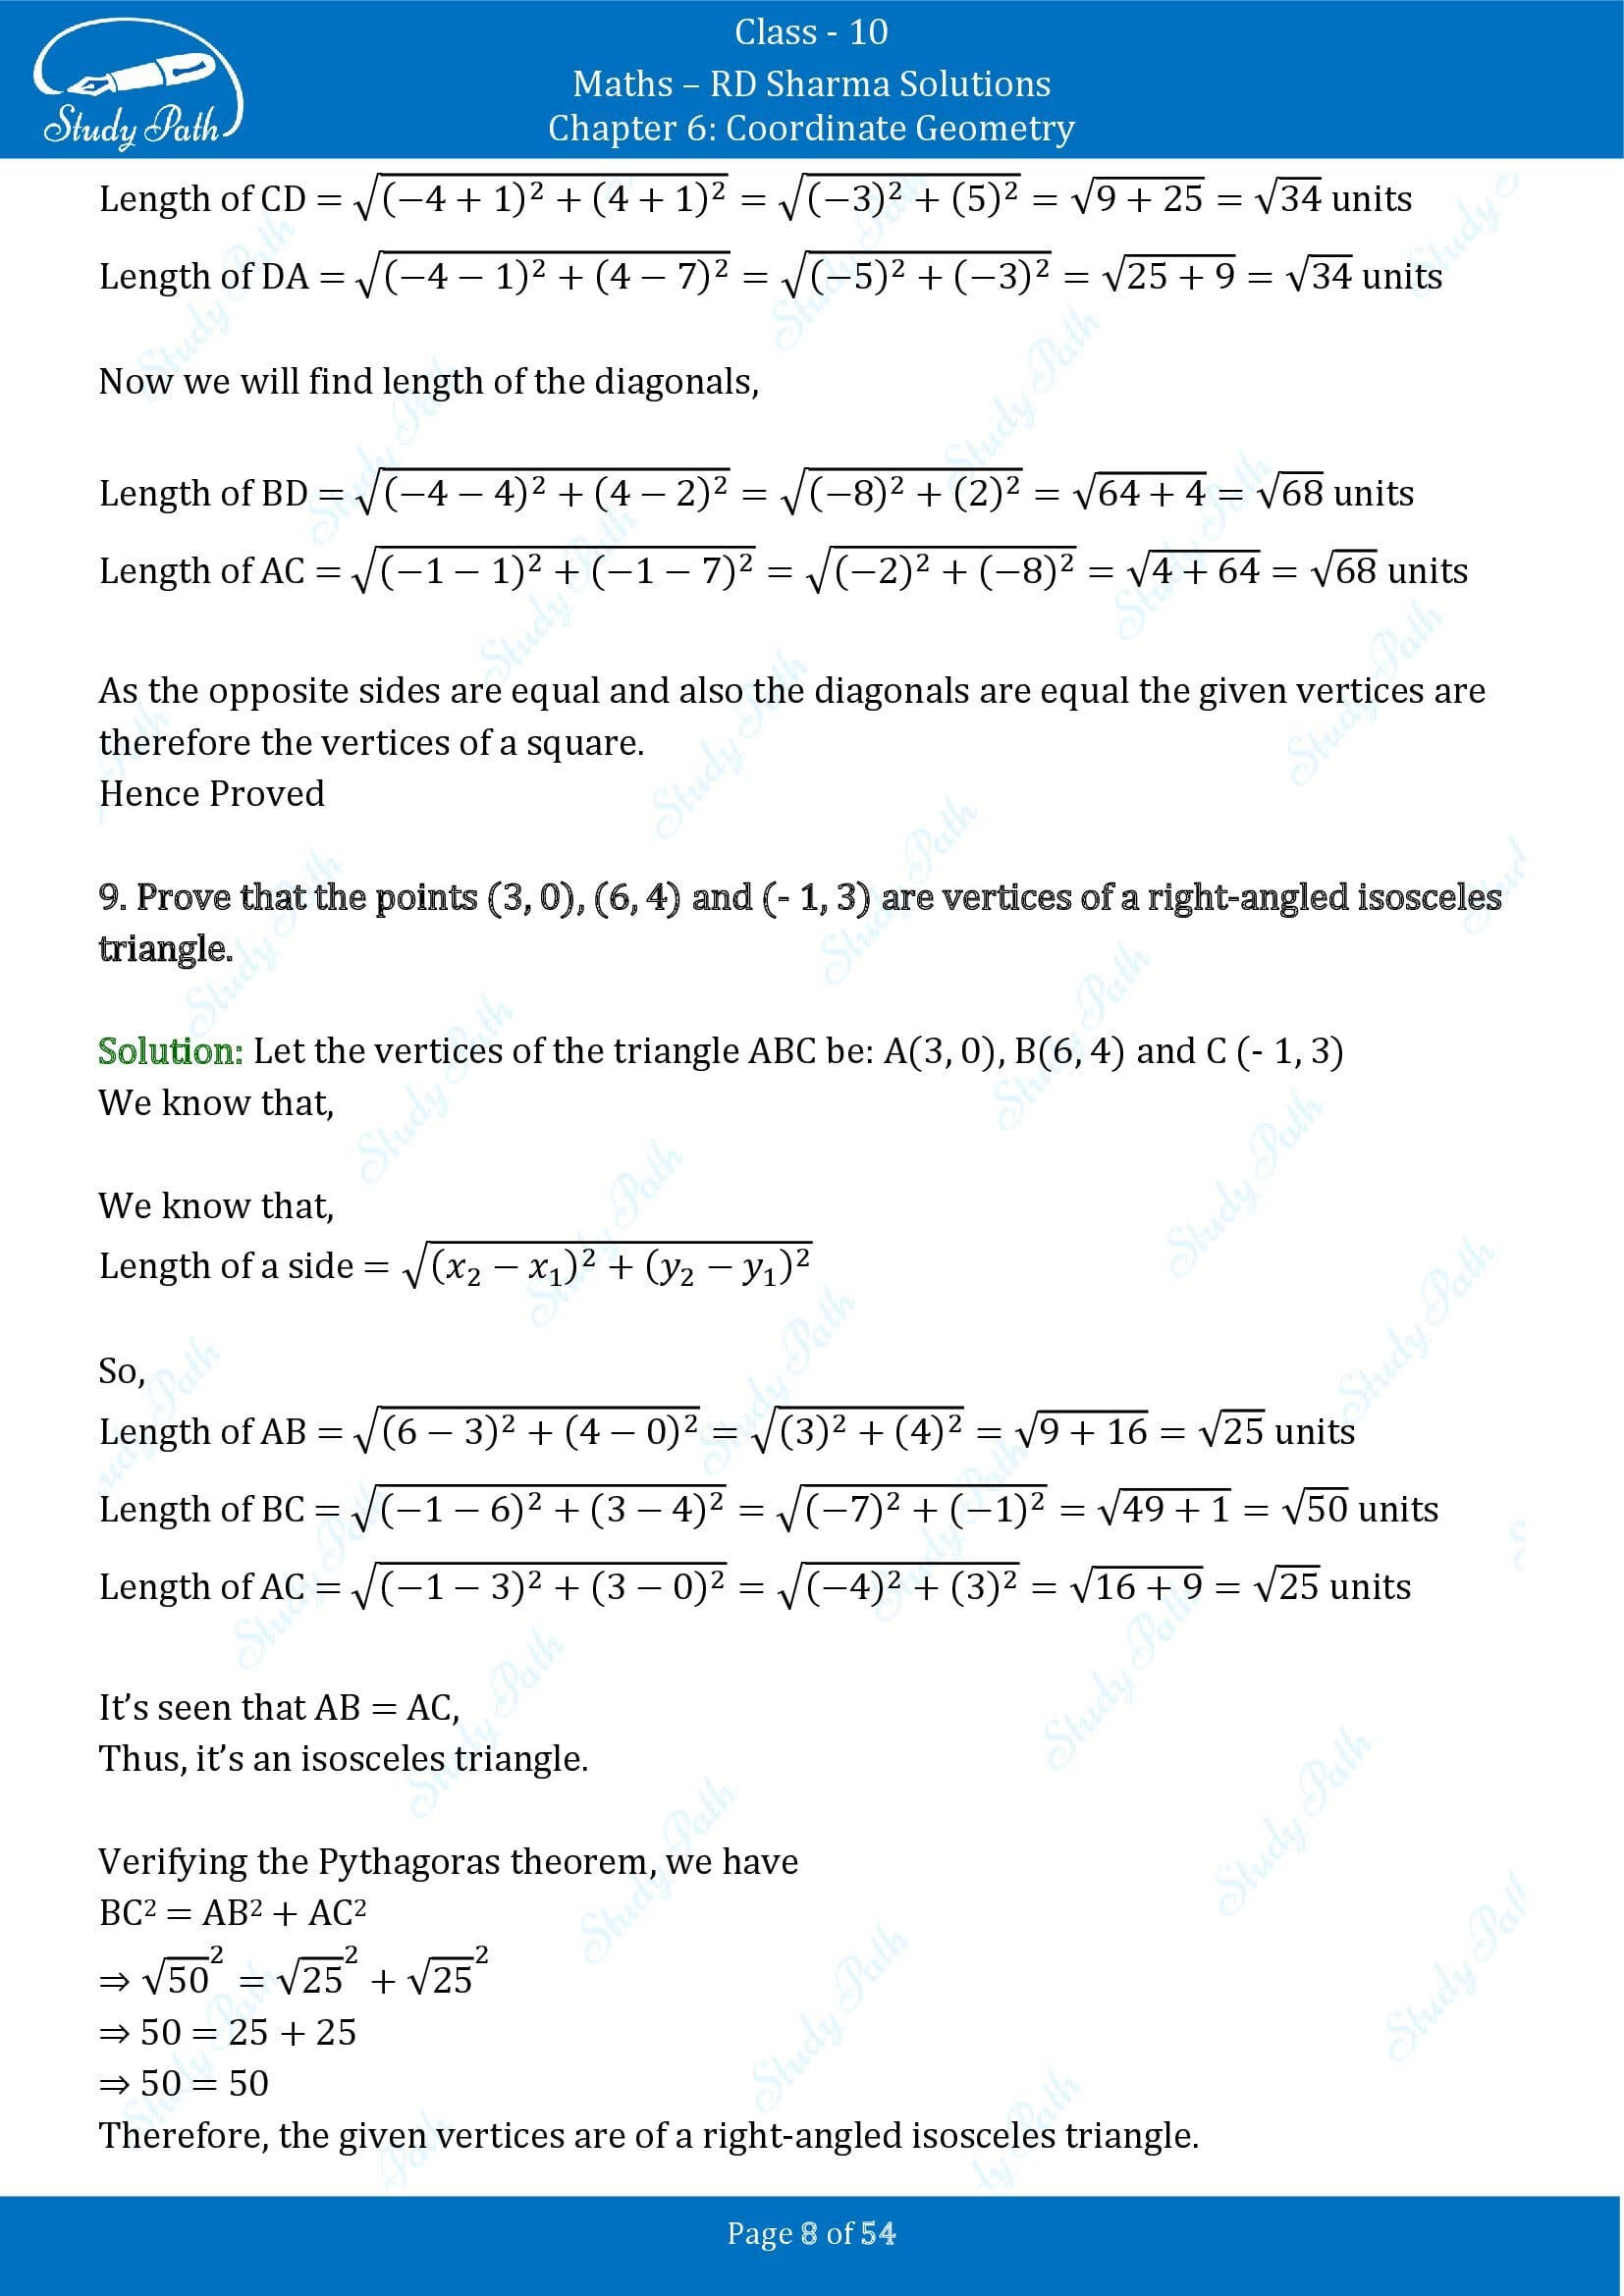 RD Sharma Solutions Class 10 Chapter 6 Coordinate Geometry Exercise 6.2 0008